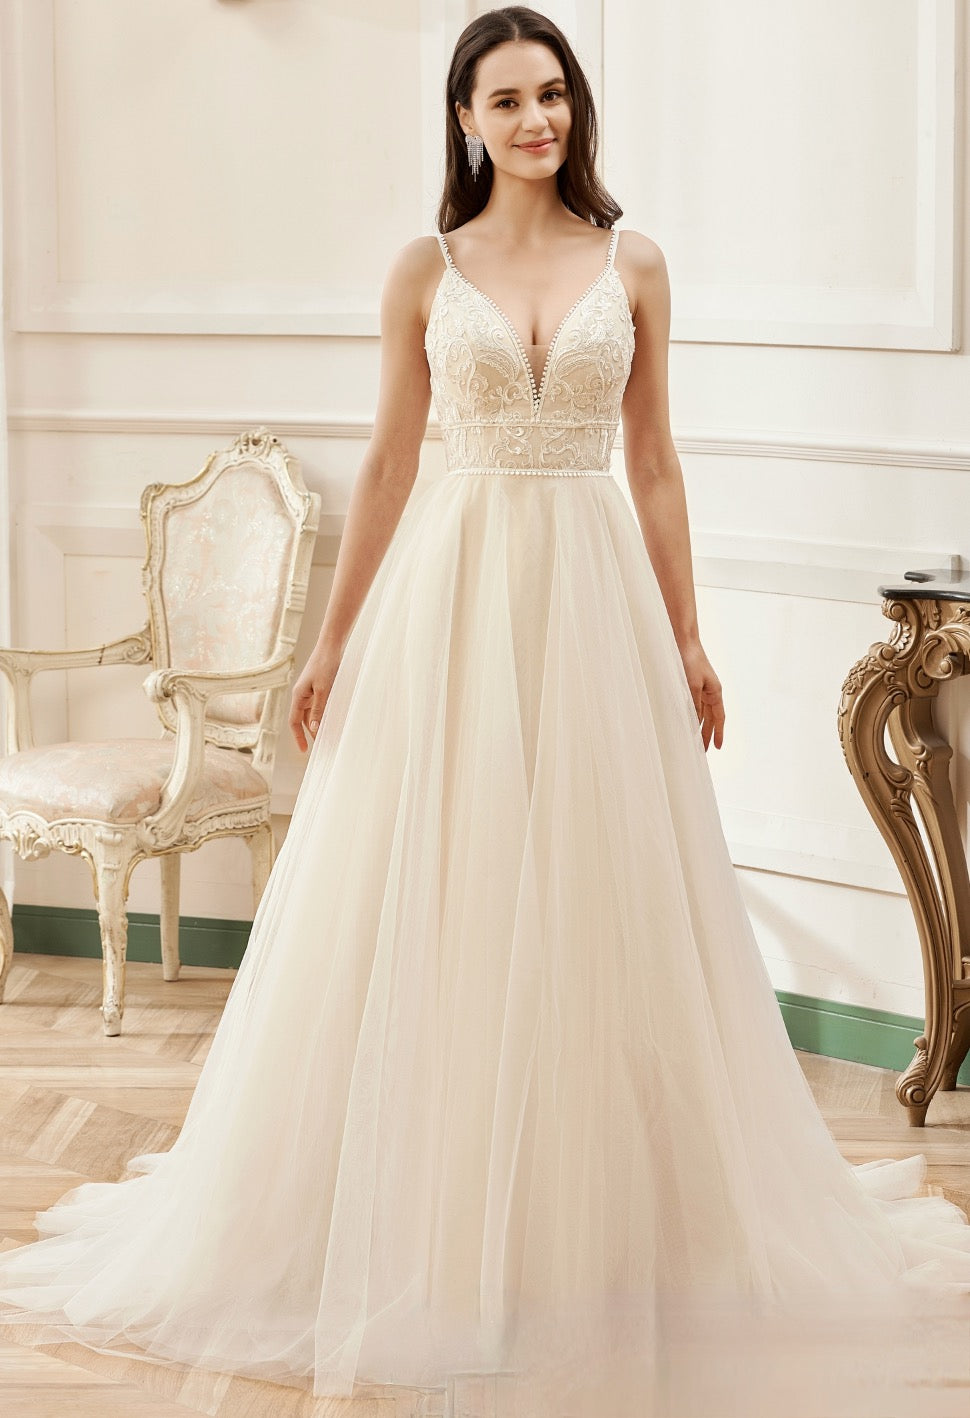 Load image into Gallery viewer, Champagne Romantic Spaghetti Straps A-Line Wedding Dress
